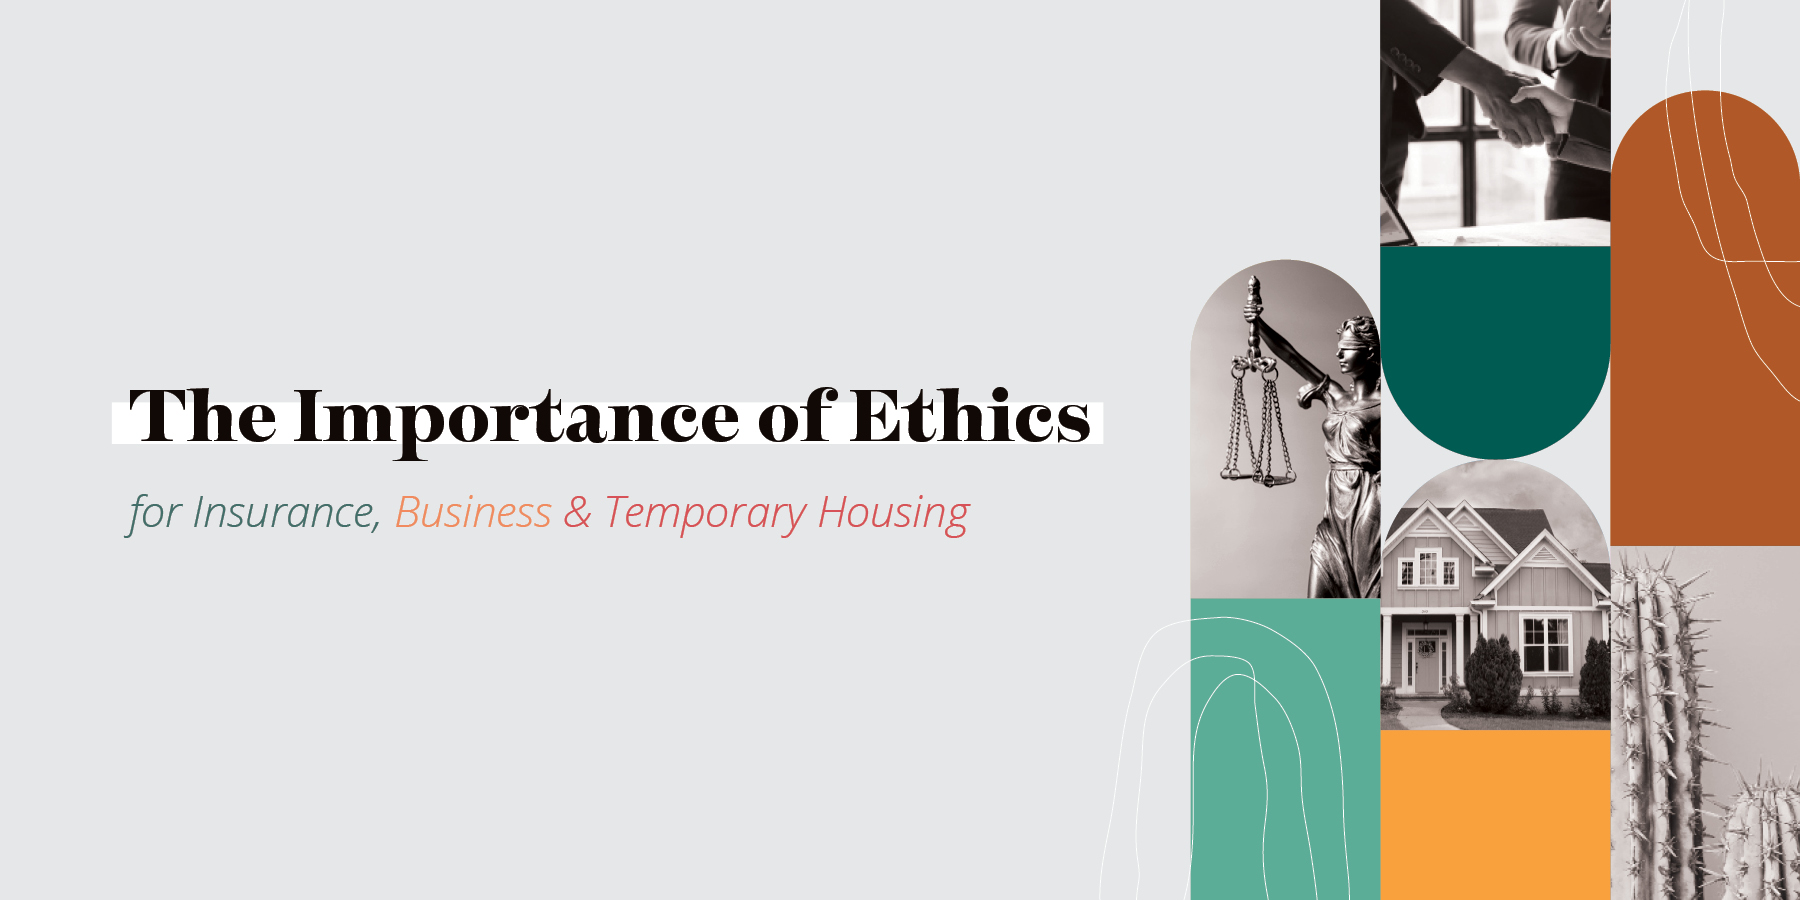 the importance of ethics: insurance, business, and temporary housing